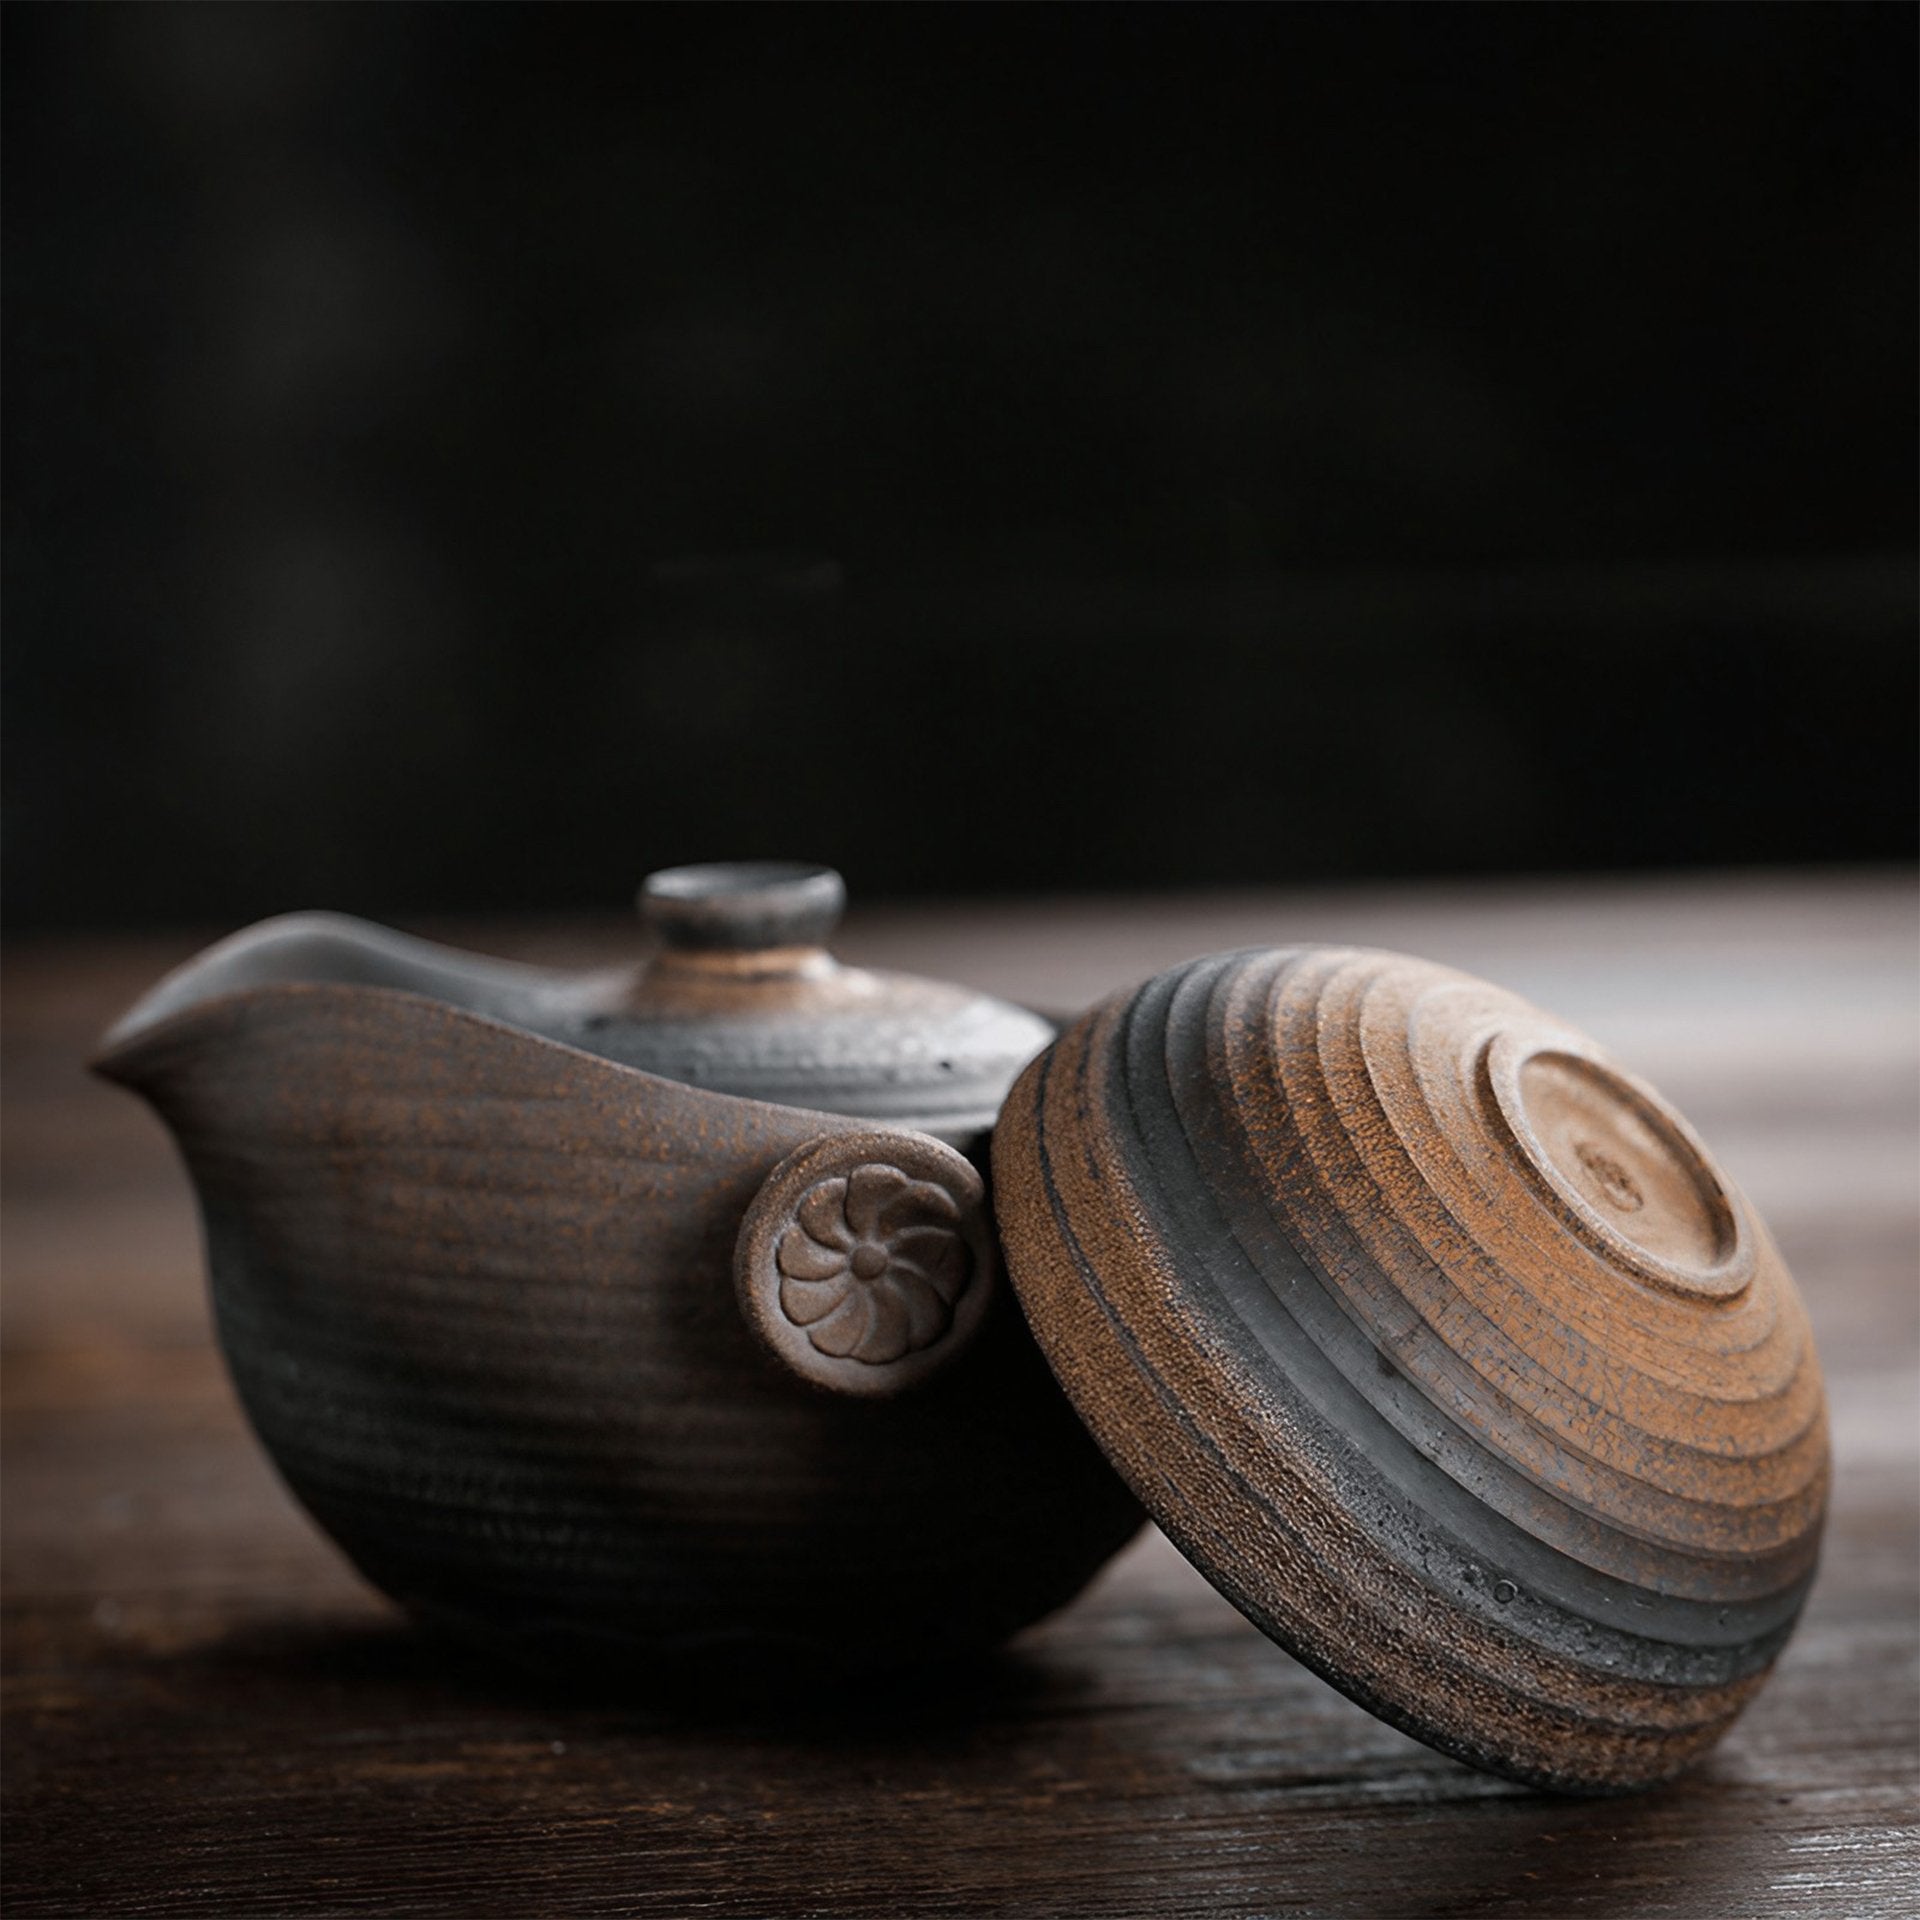 Open textured ceramic teapot with lid off to the side, showcasing a floral motif on the body, on a wooden surface.